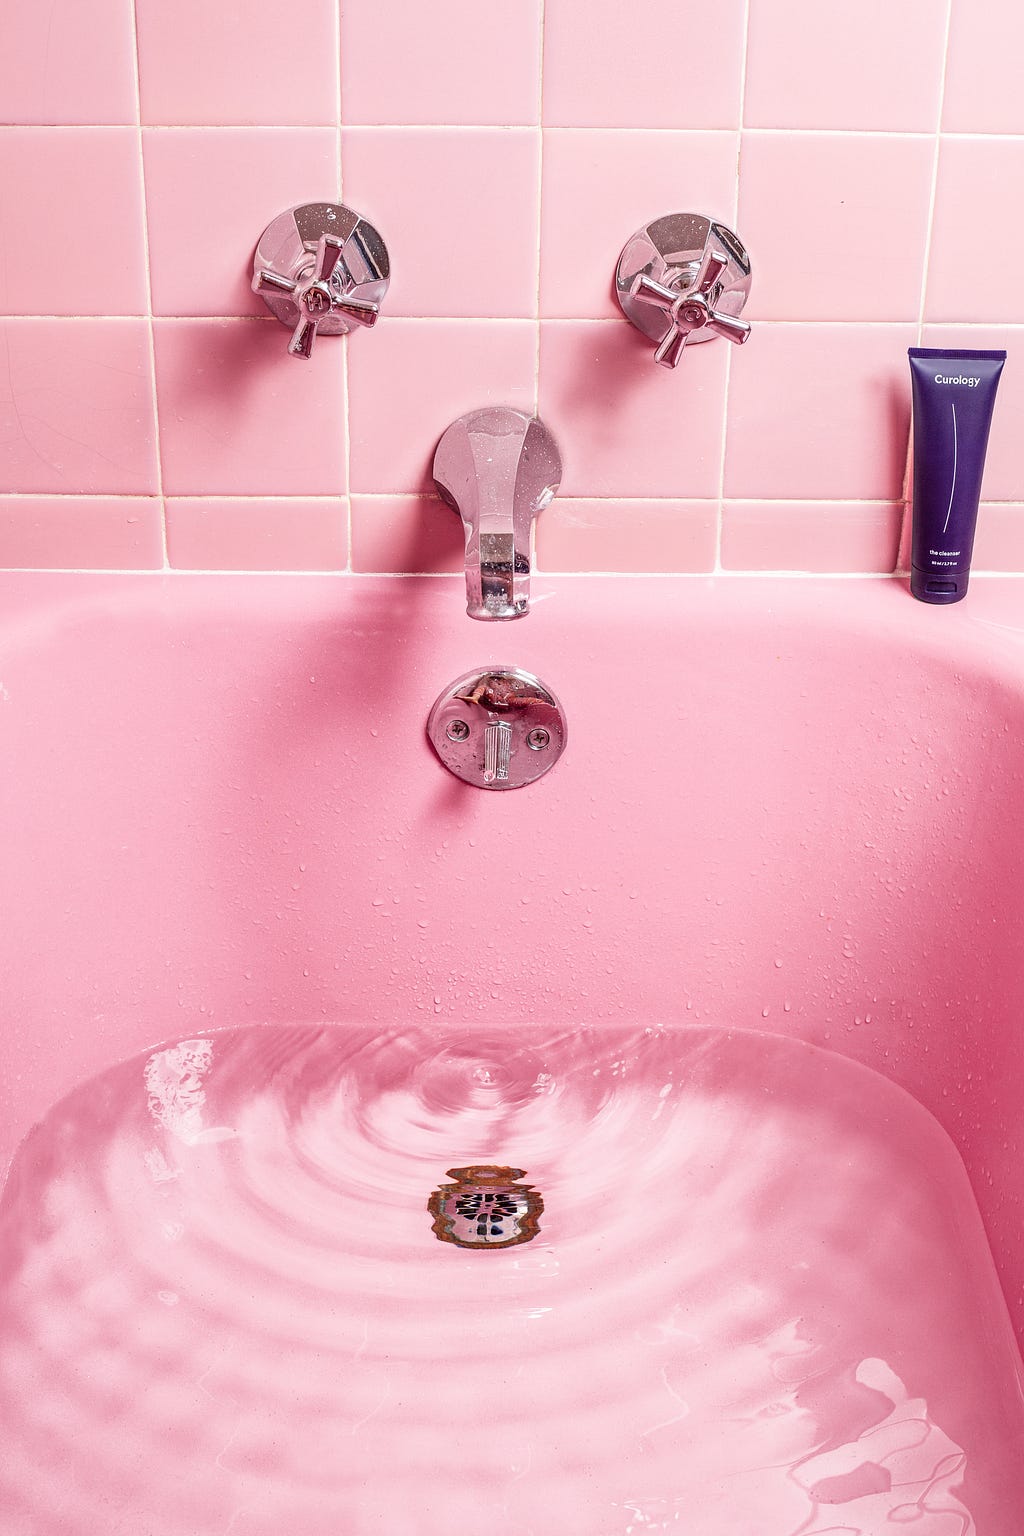 Pink bath tub filled with rippling clear water. Pink bathroom tile and silver faucet. Dark purple tube of Curology “the Cleanser” body care product on the right side of the tub faucet.